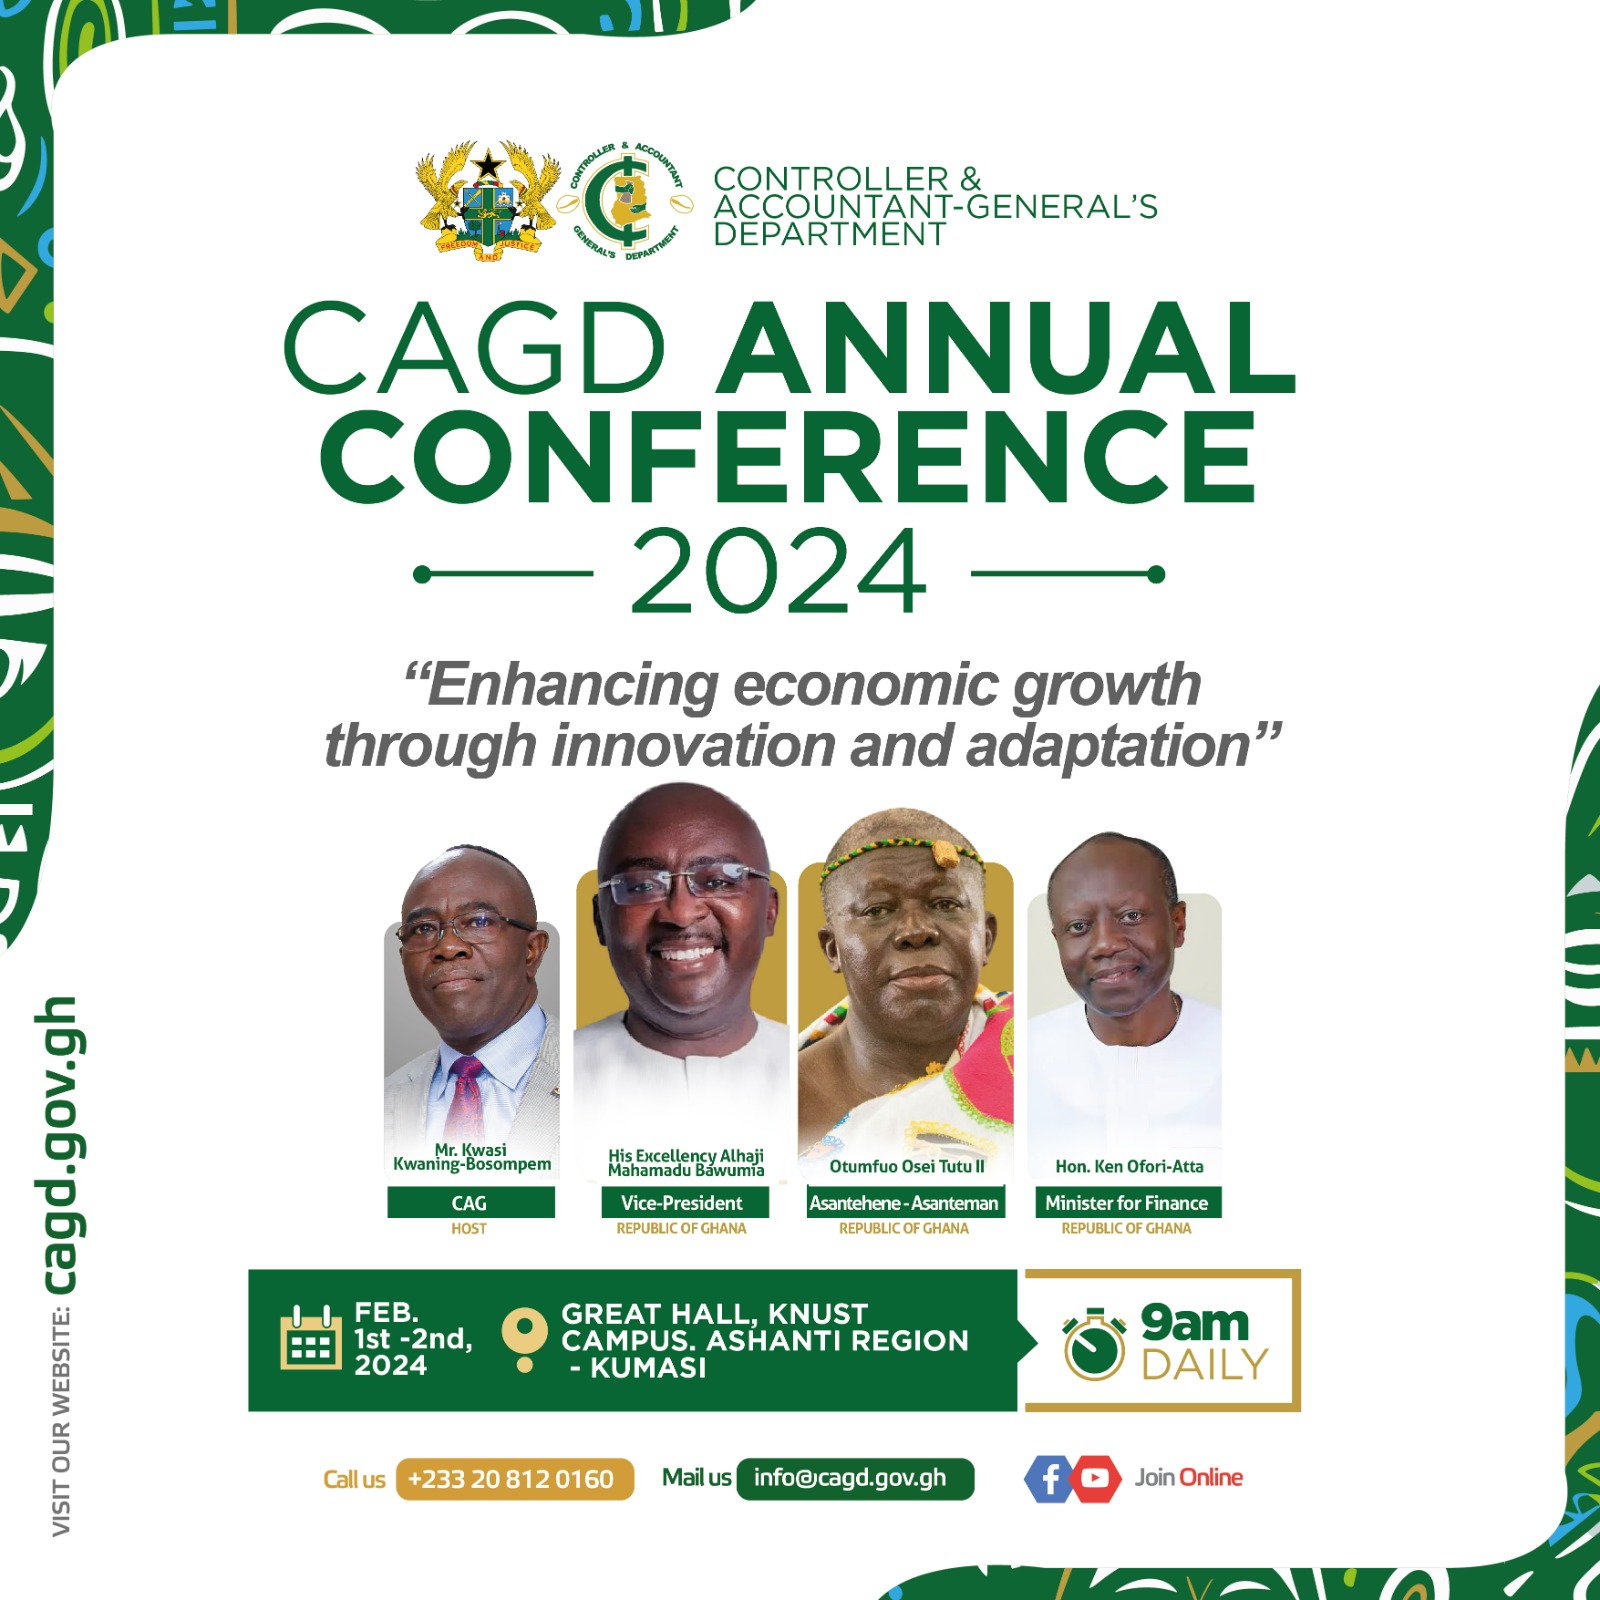 Annual Conference 2024